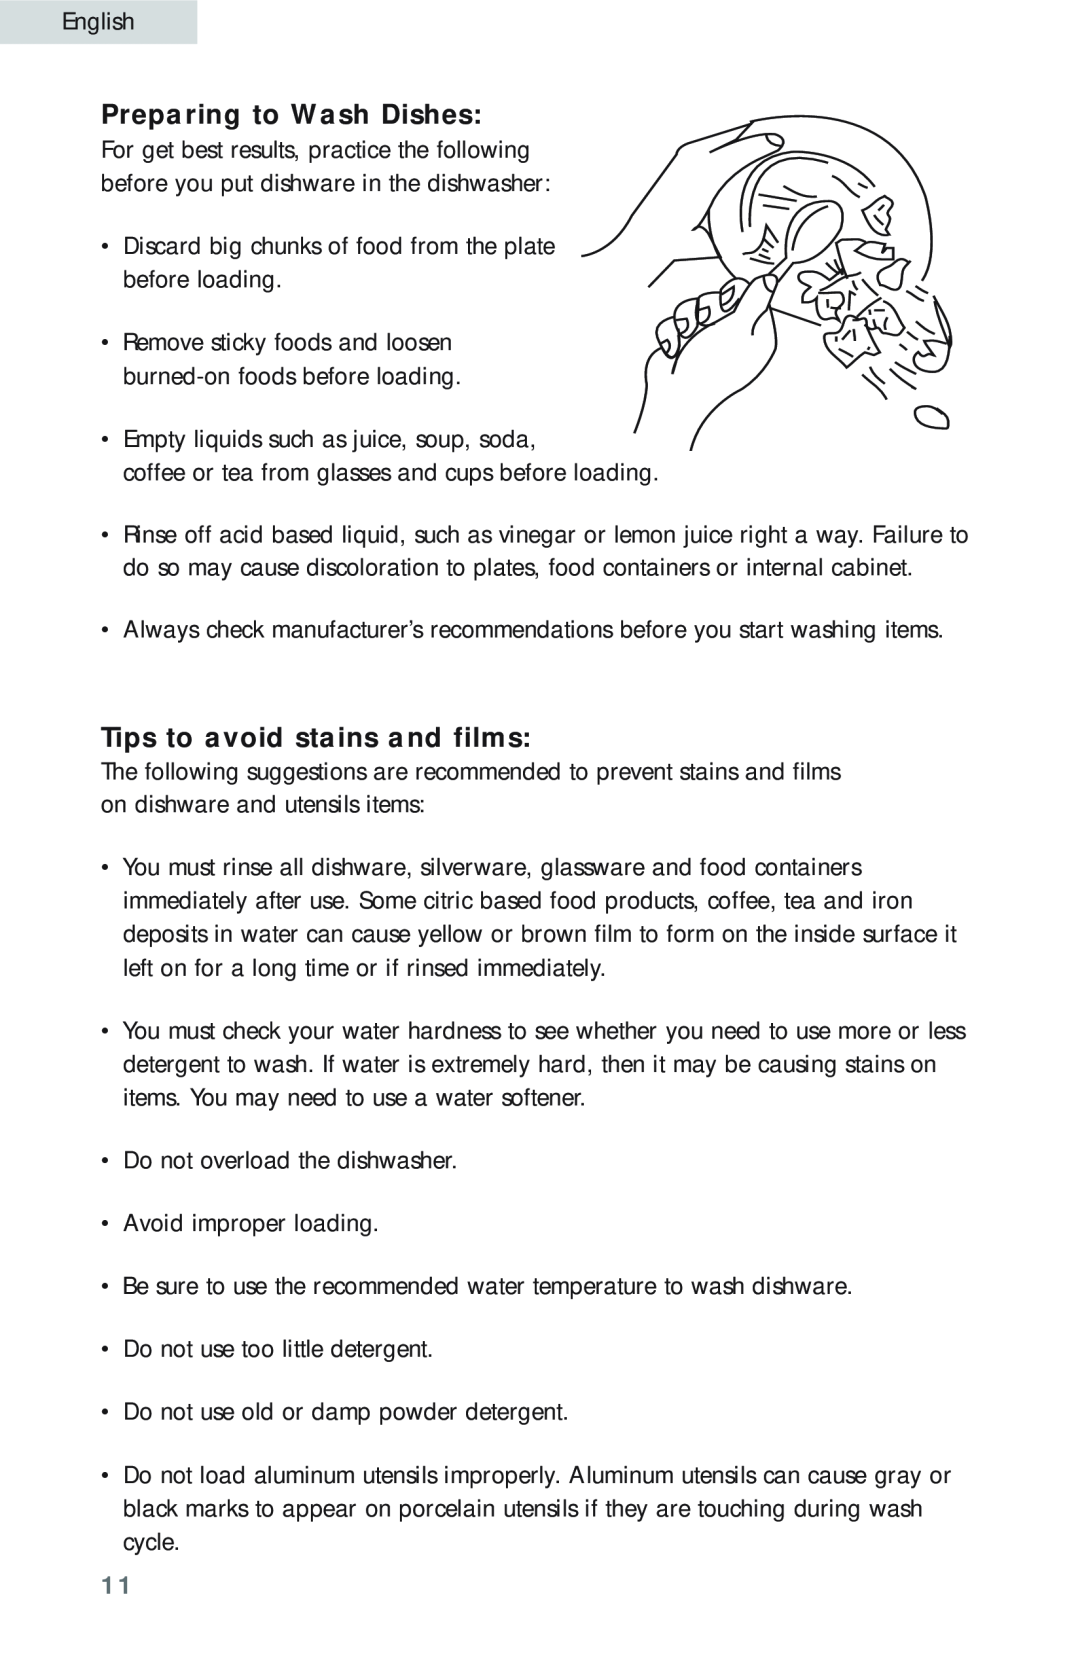 Haier HDB18EB user manual Preparing to Wash Dishes, Tips to avoid stains and films 